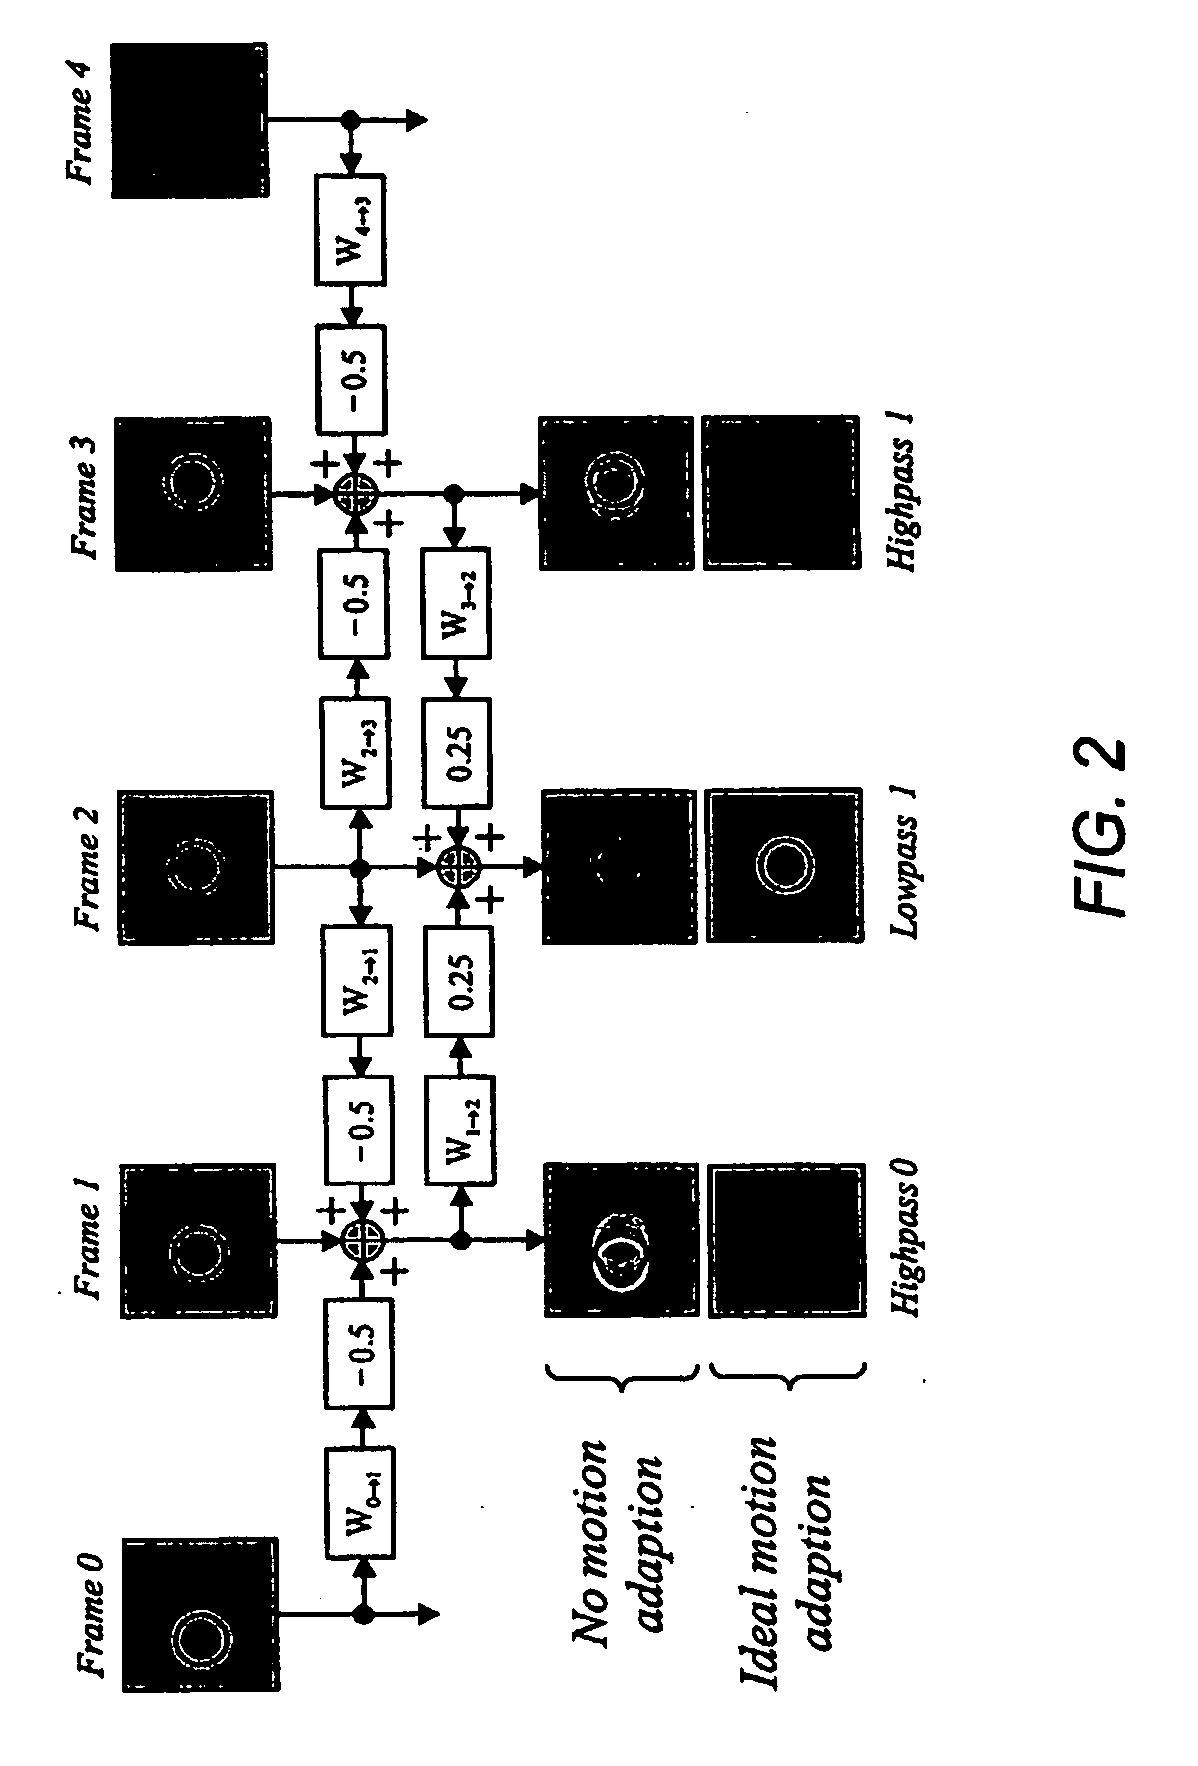 Method of signalling motion information for efficient scalable video compression